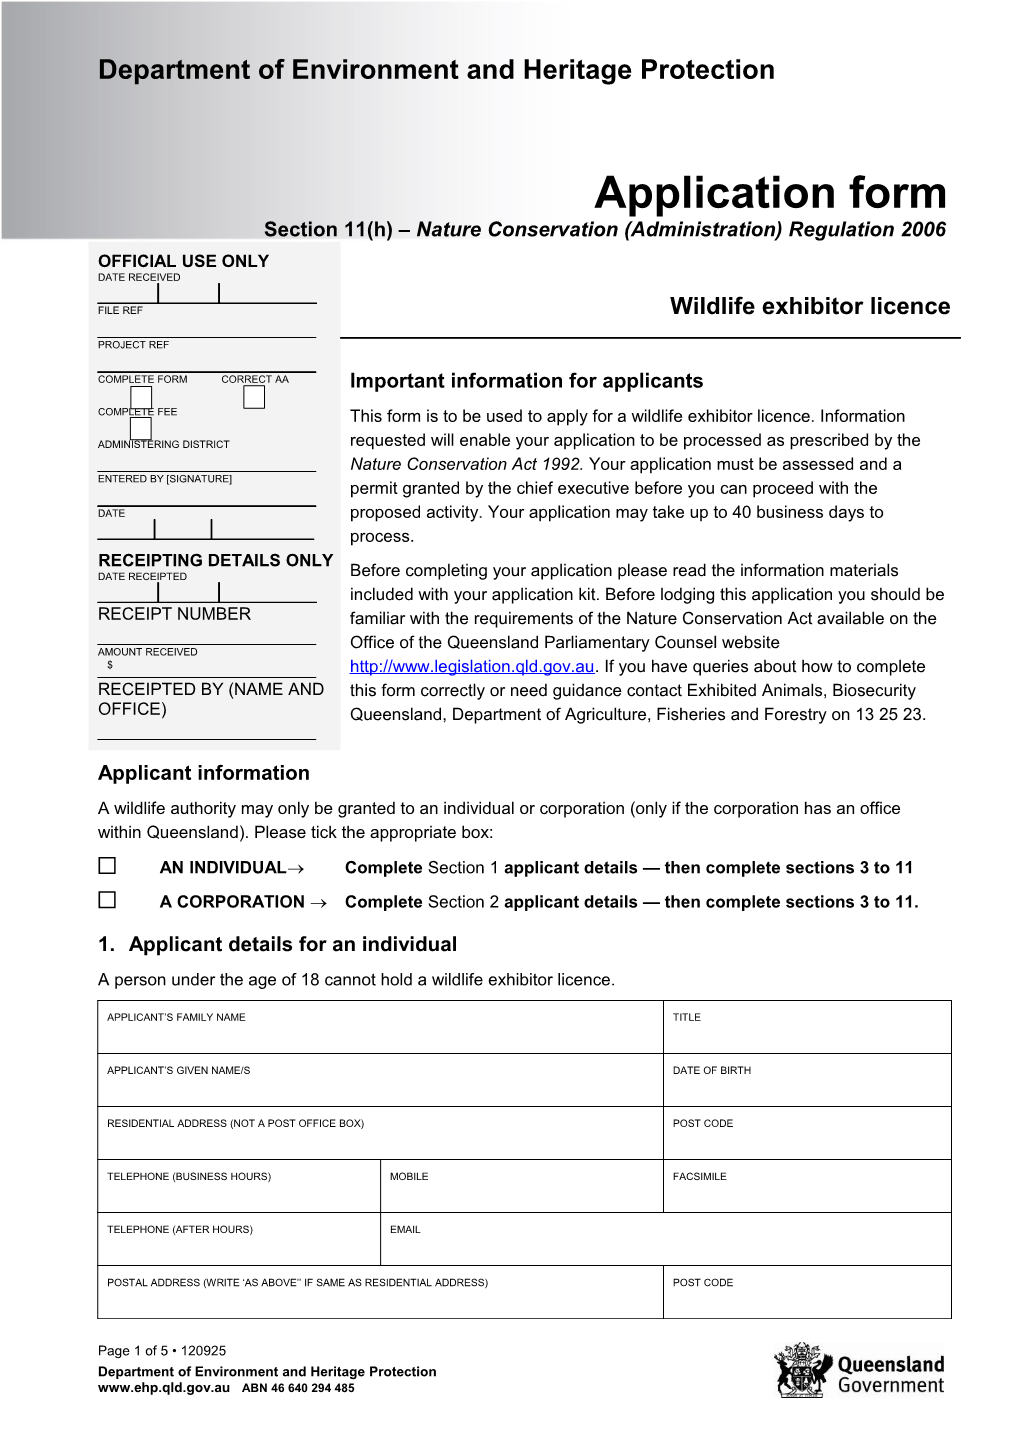 Application Form Wildlife Exhibitor Licence